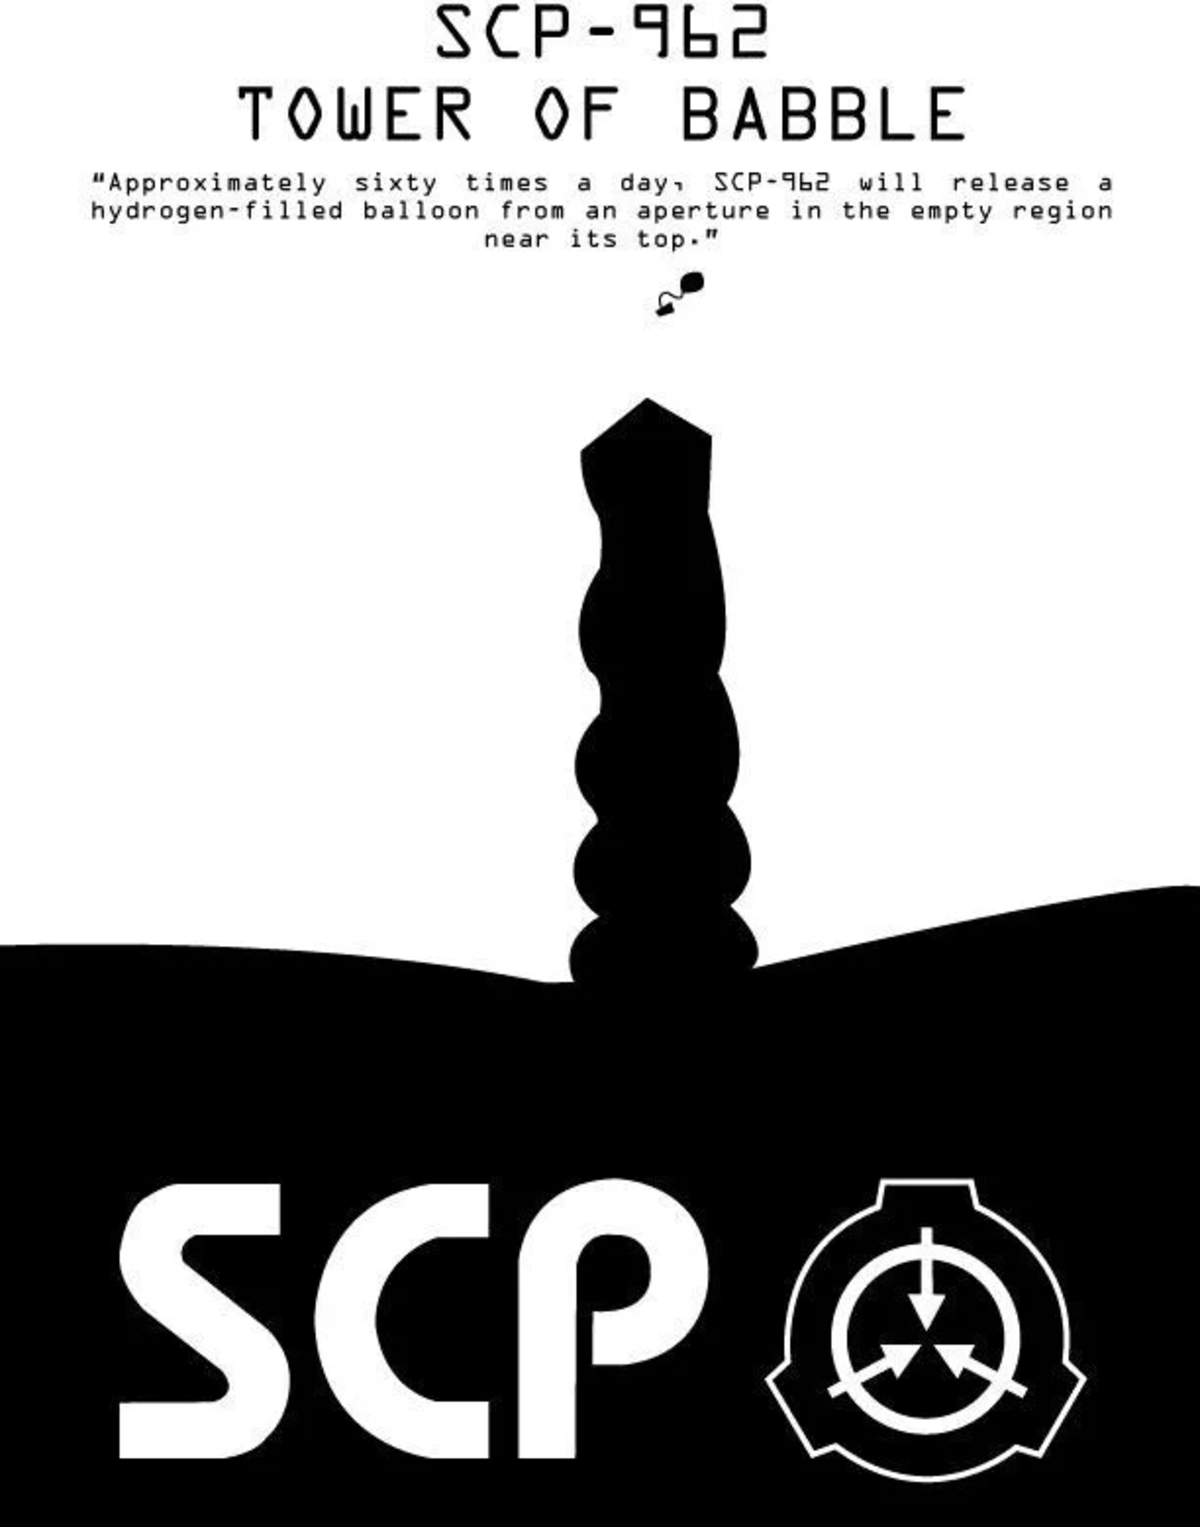 SCP-962-AE (More details)